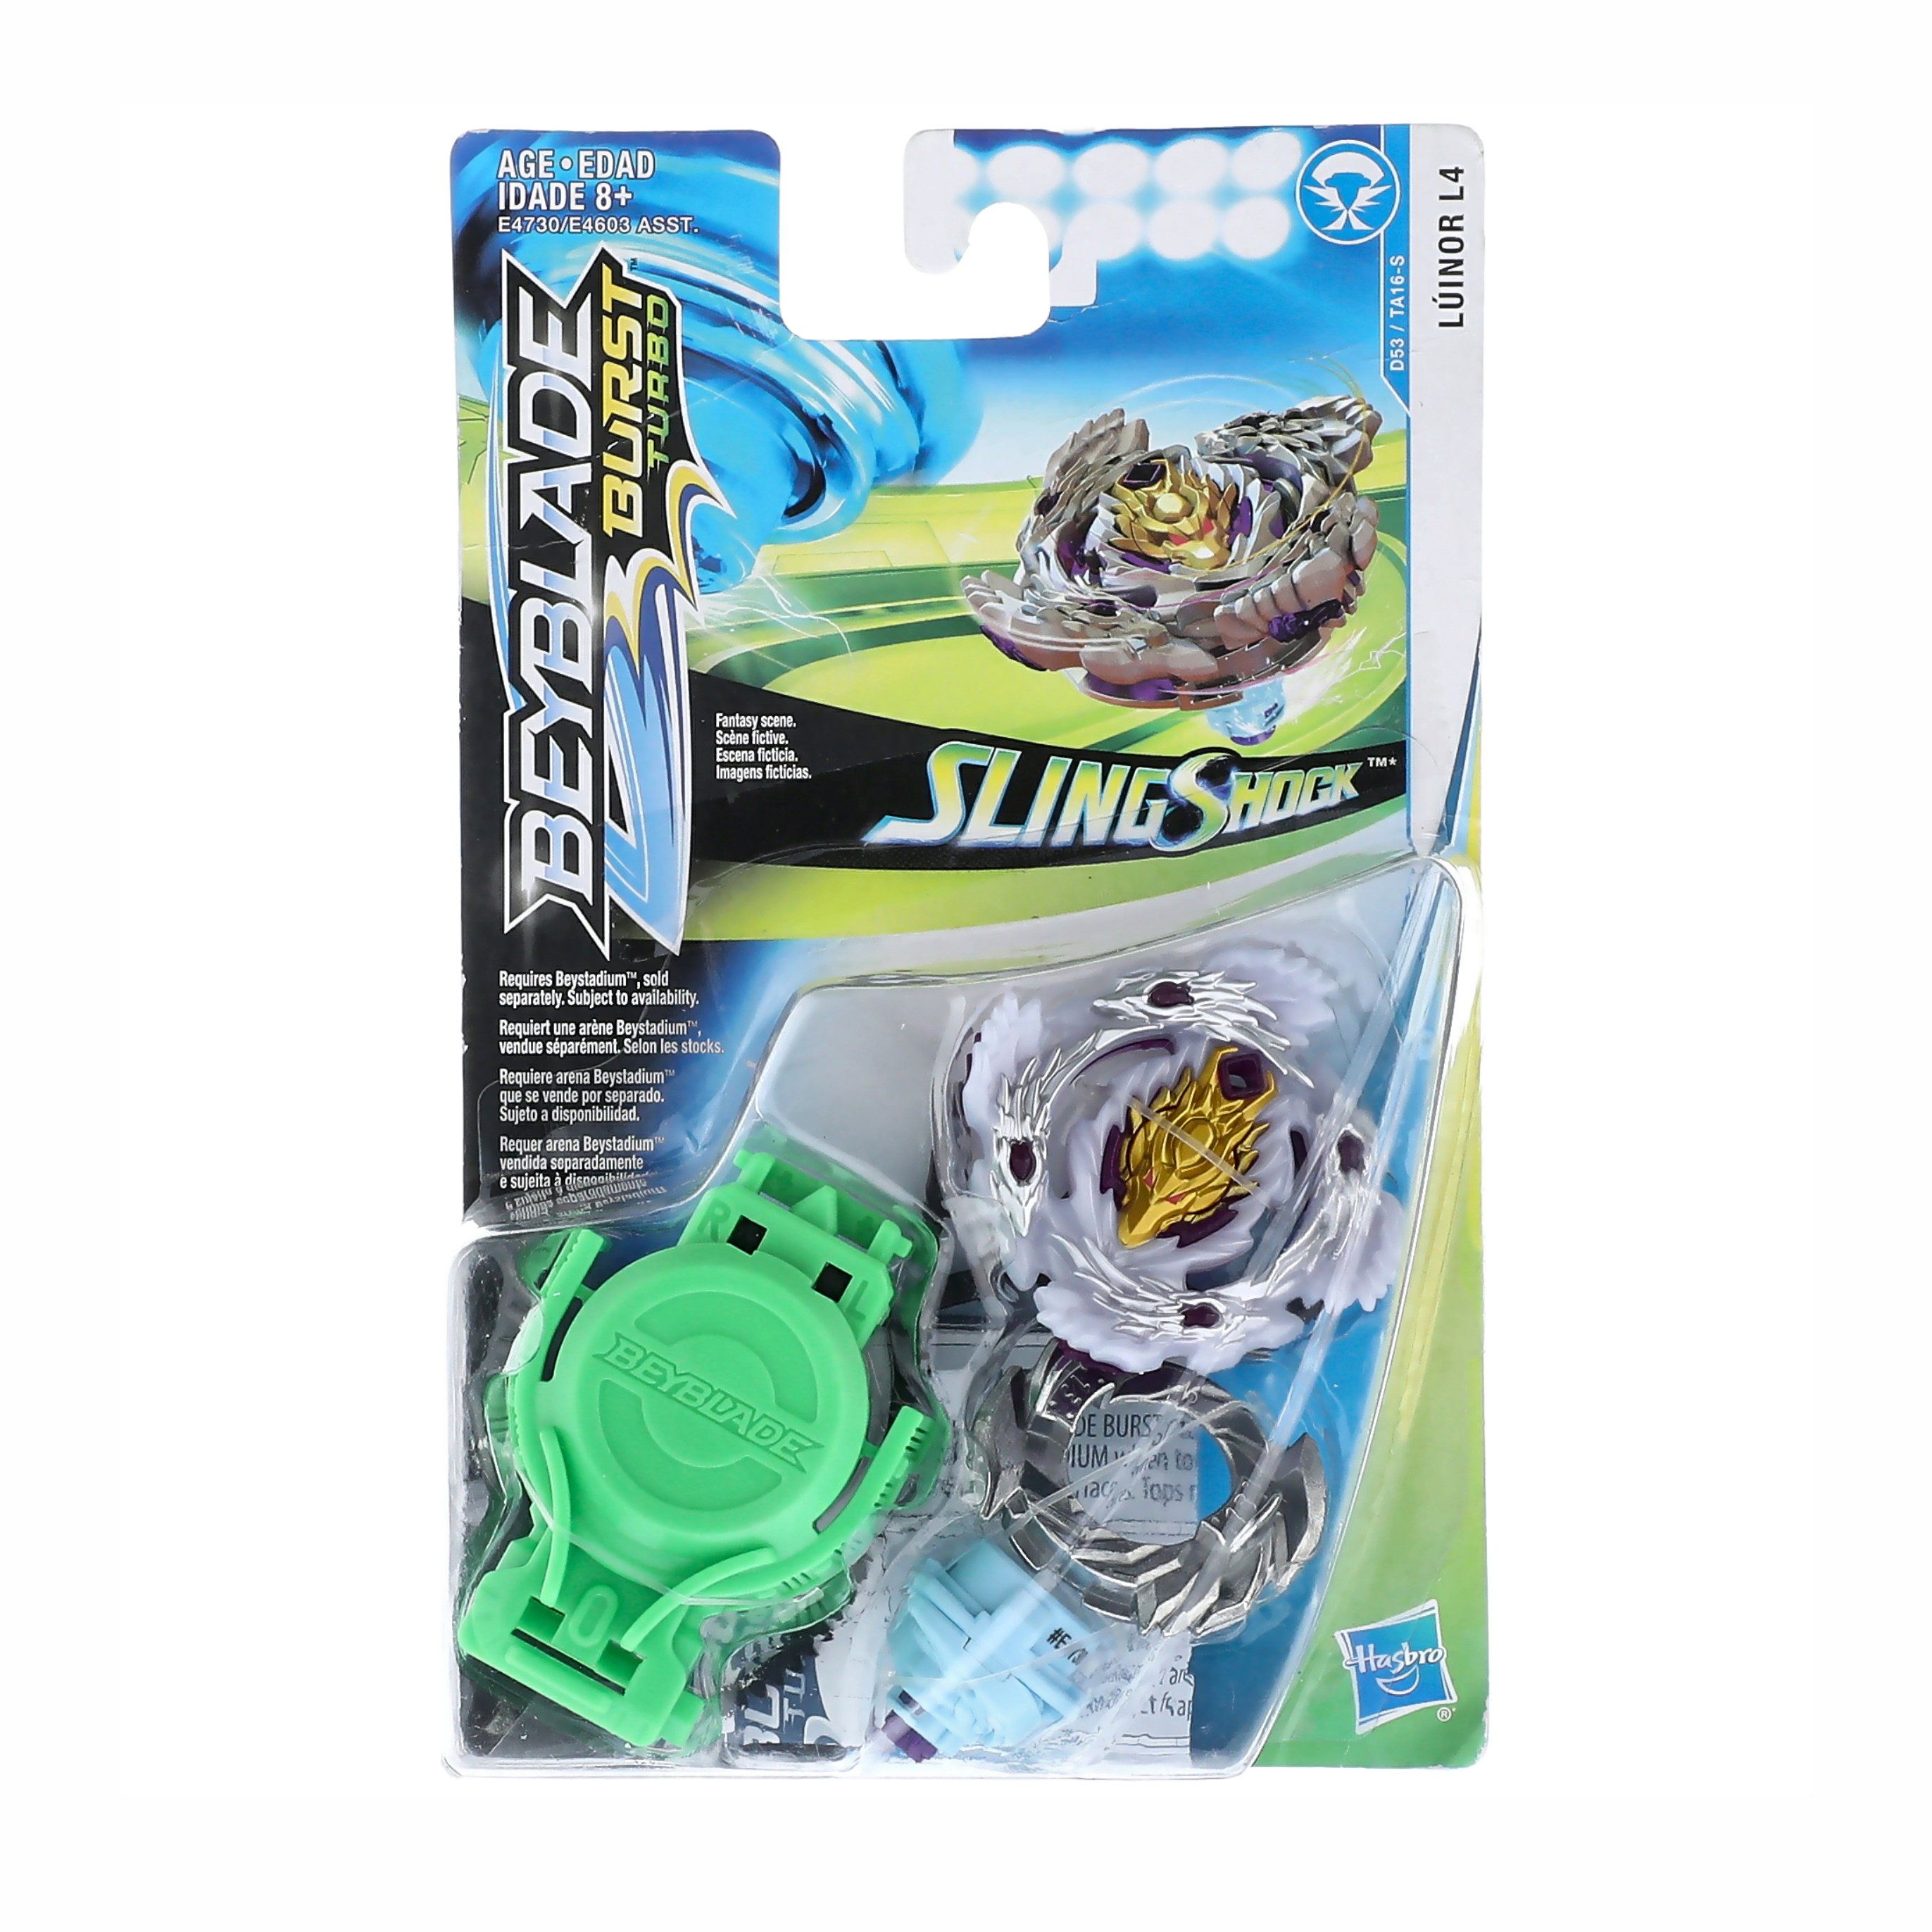 stores that have beyblades